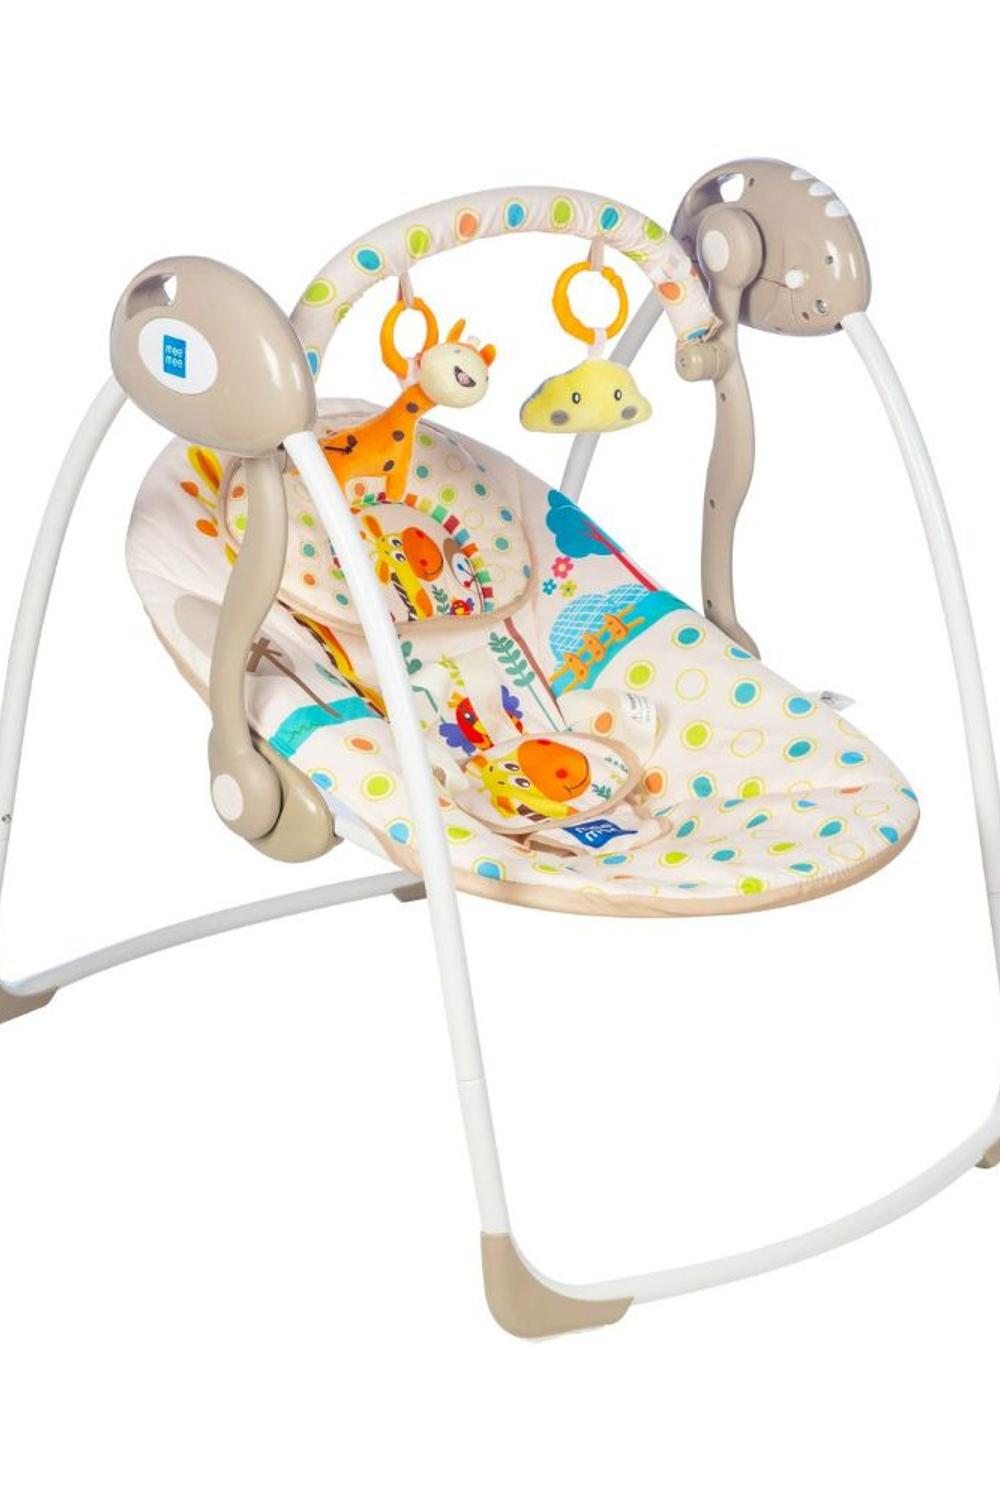 Mee Mee Soothing Baby Swing with Automatic 6 Speed Swinging Feature(Beige)